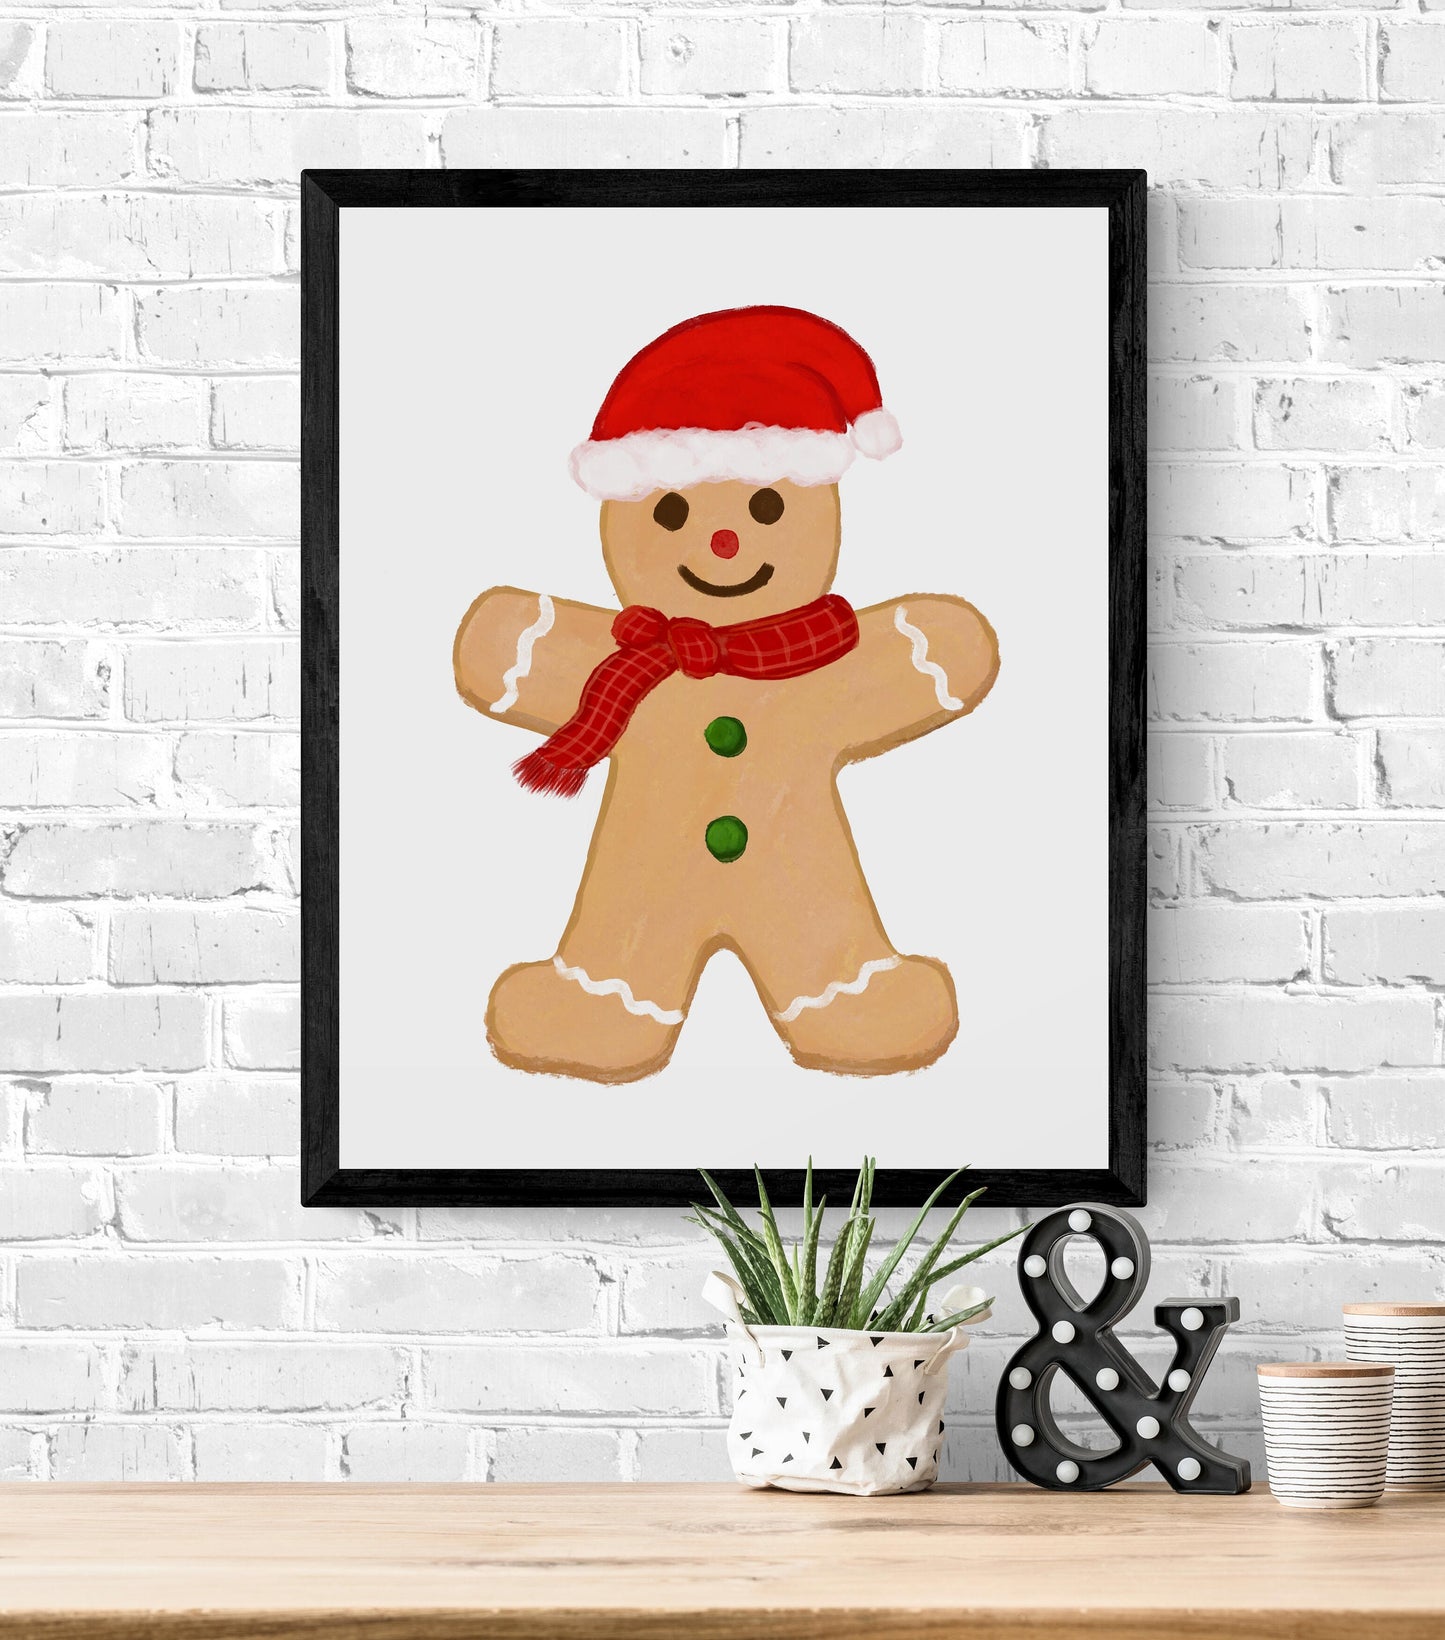 Christmas Gingerbread Man Print, Winter Cookie Art, New Years Gift, Winter Home Decor, Xmas Gingerbread Man Artwork, Cute Winter Cookie Art